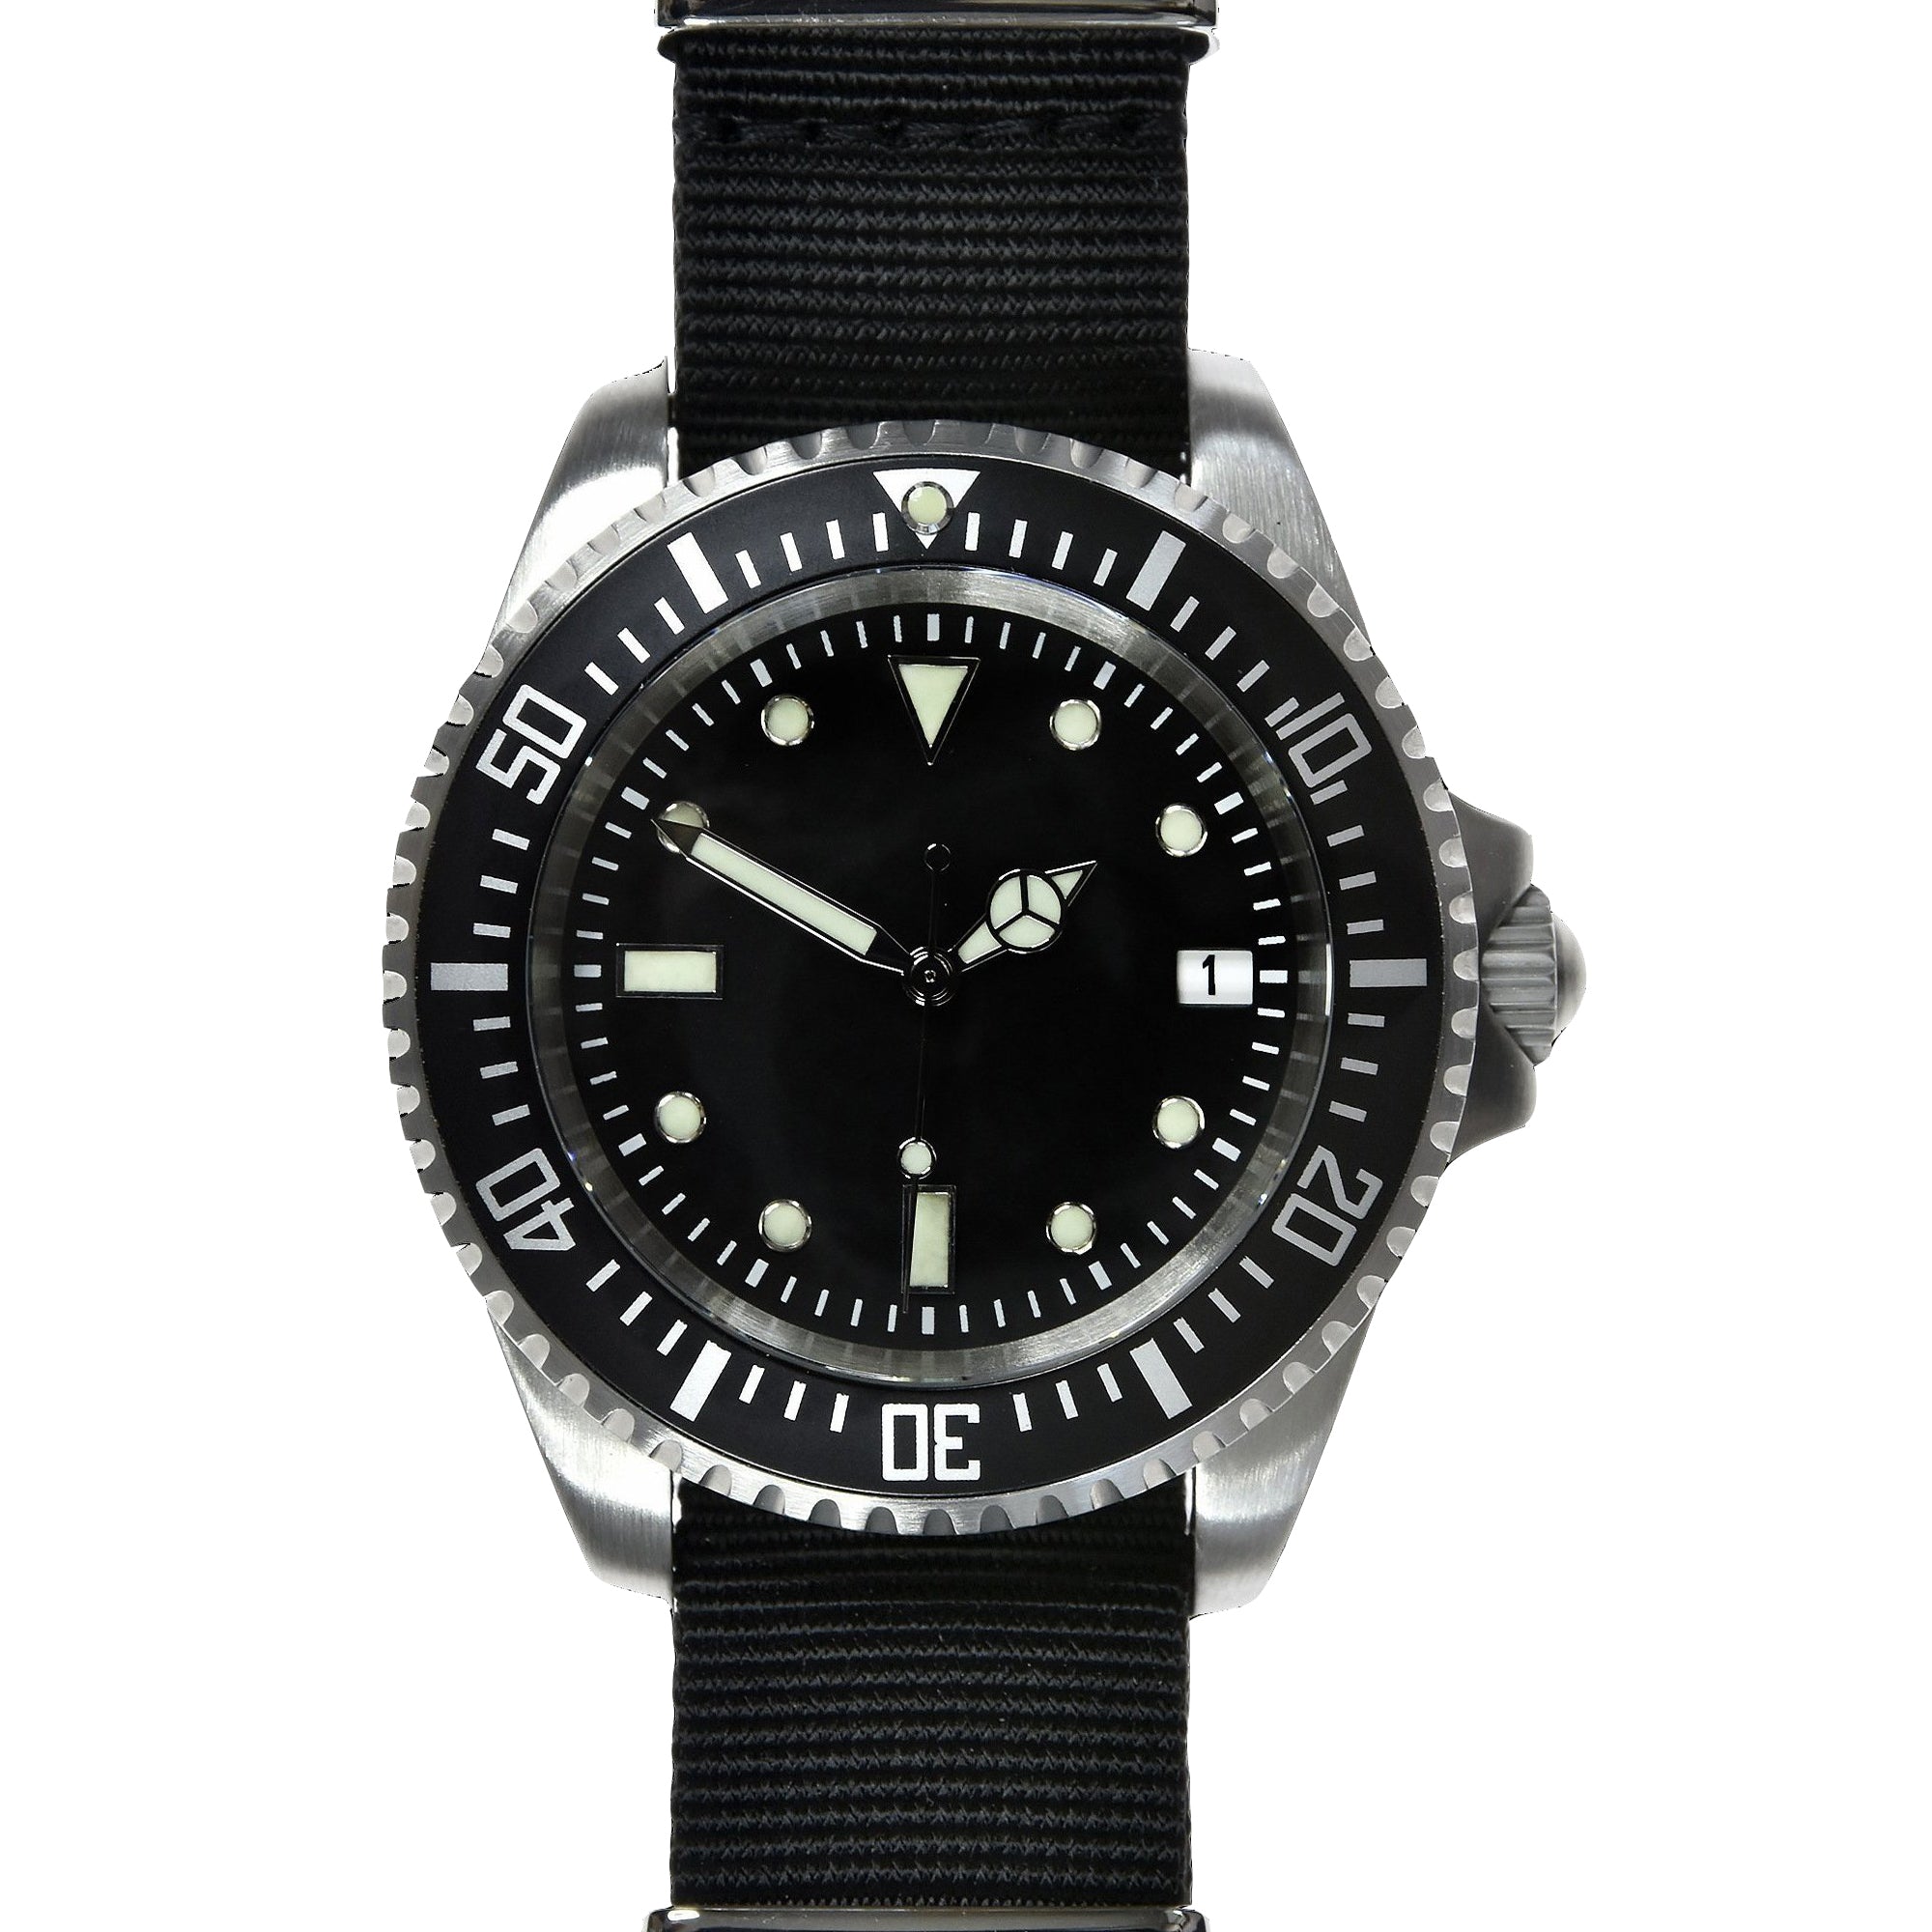 MWC 24 Jewel 300m Water Resistant 24 Jewel Automatic Military Specification Divers Watch on Silicon Strap (Sterile)